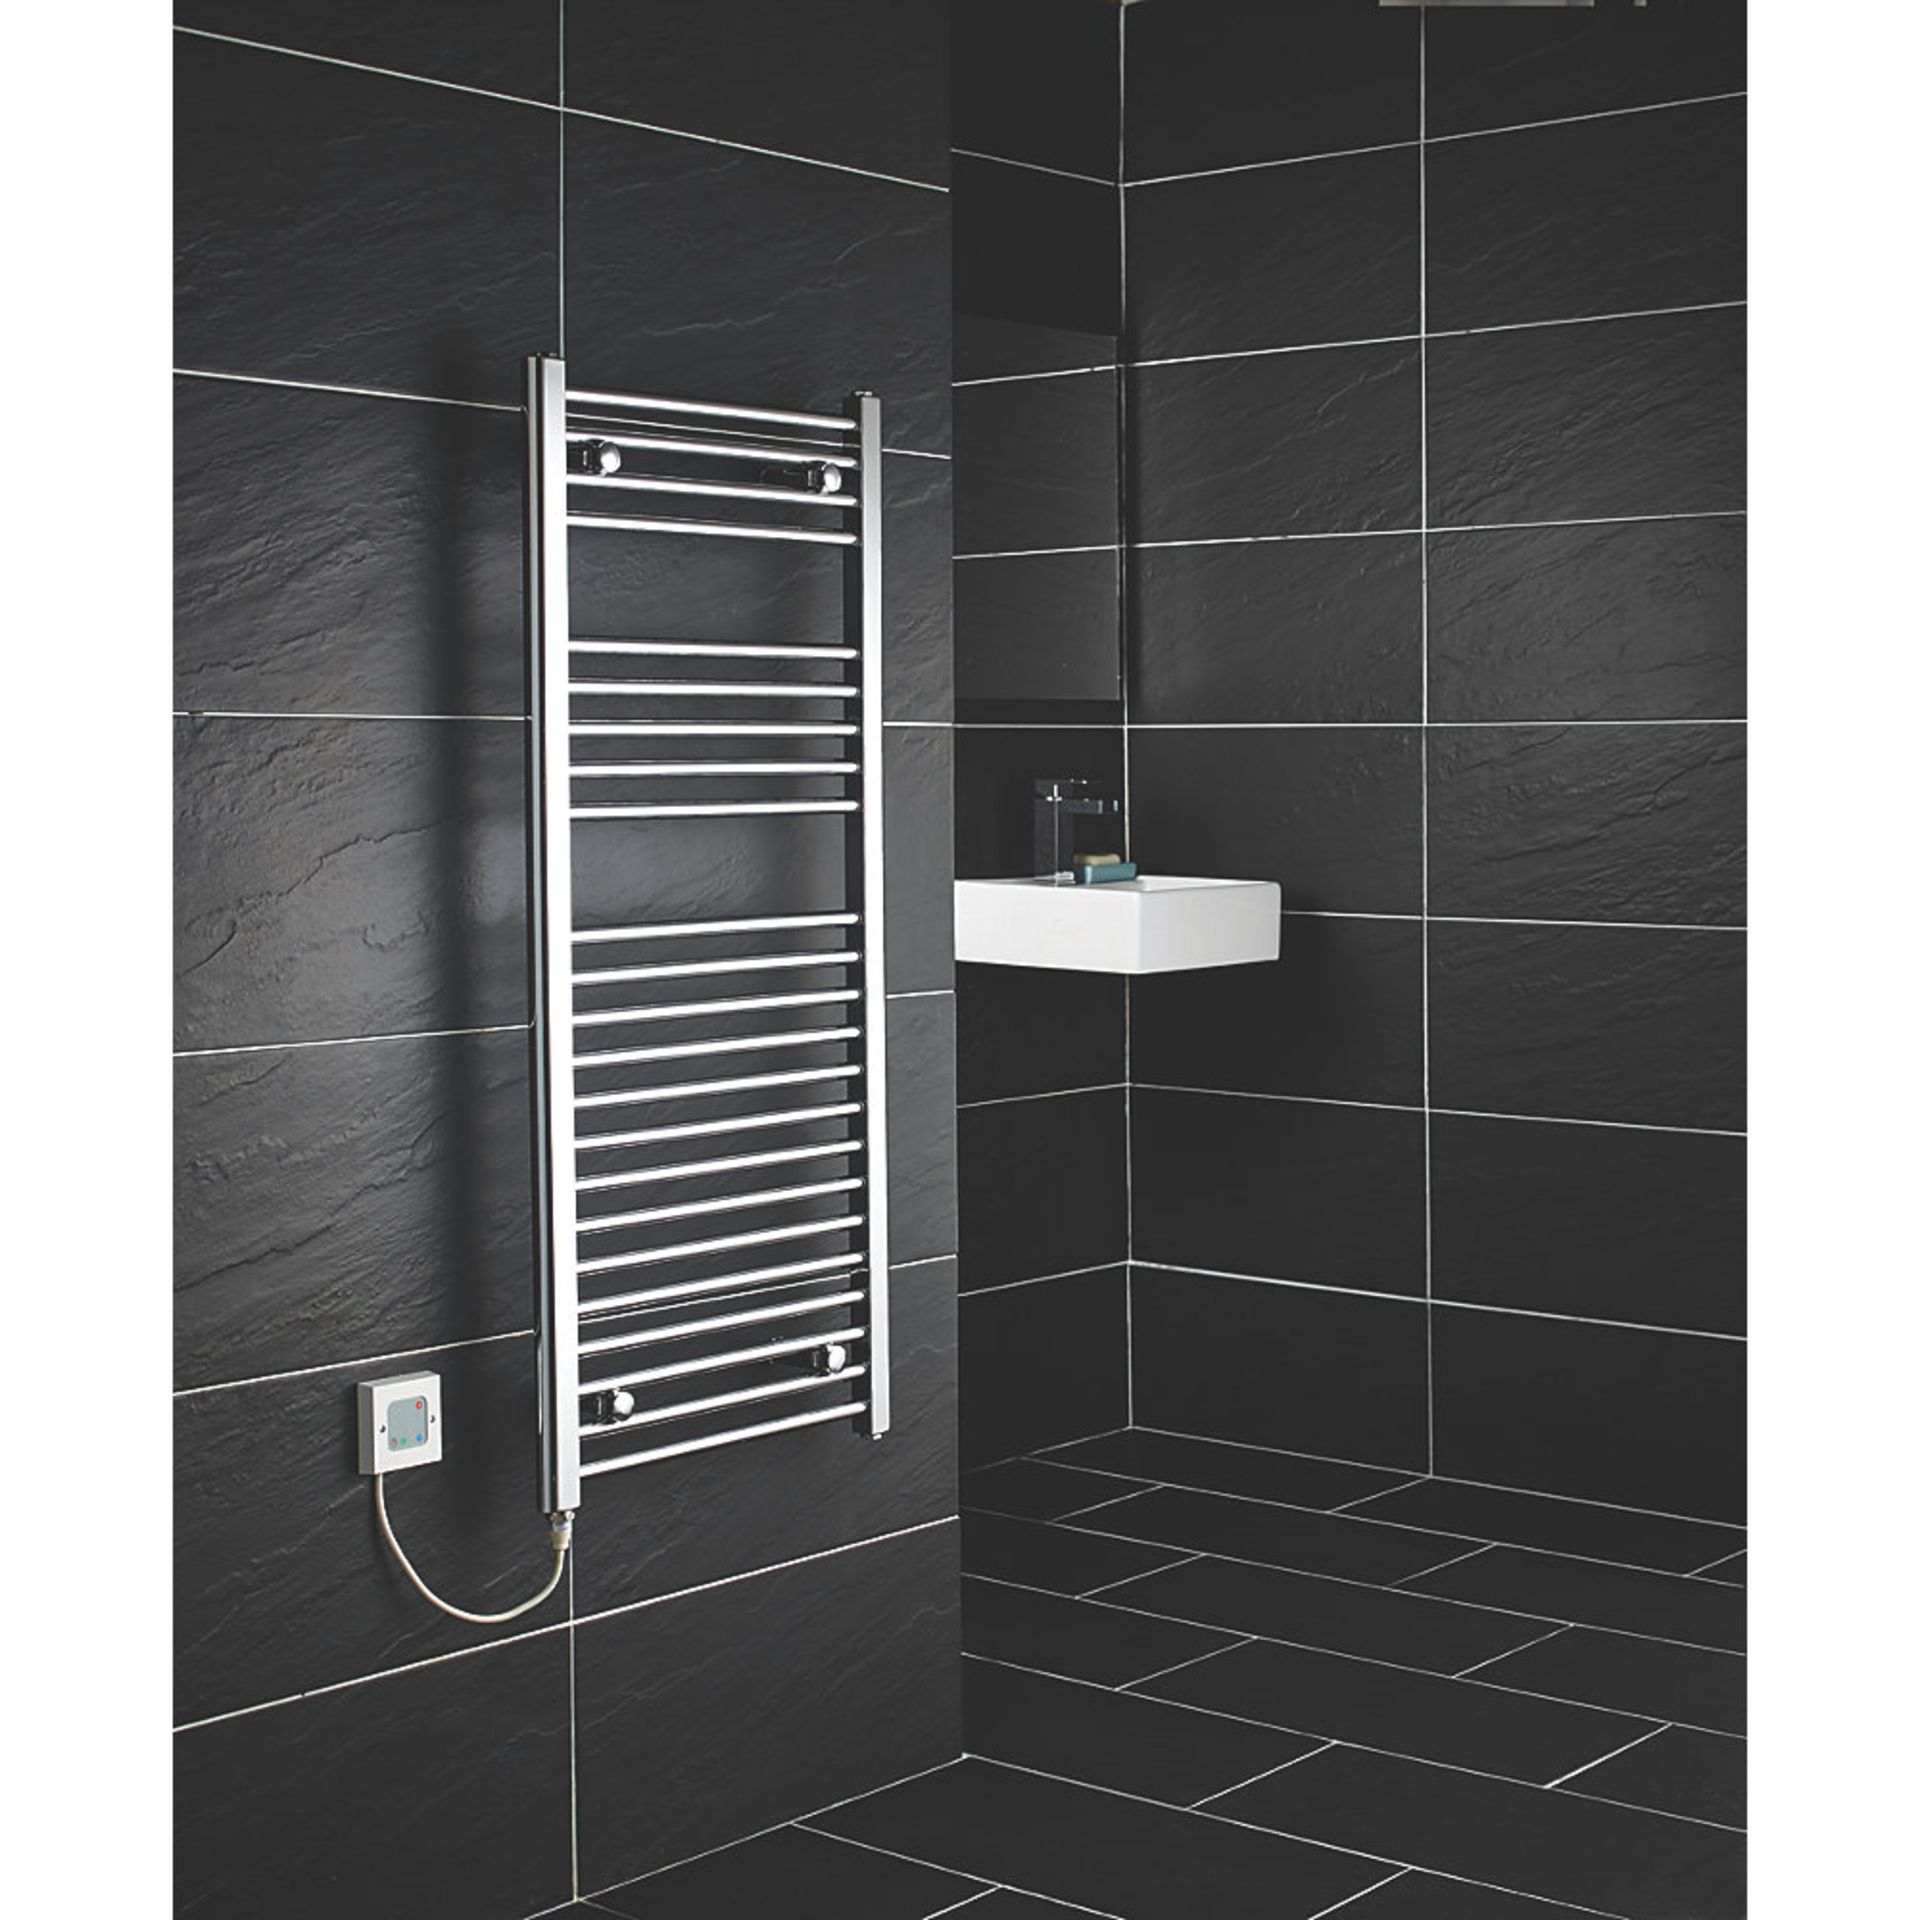 (CR17) 1200x600mm FLOMASTA FLAT ELECTRIC TOWEL RADIATOR CHROME. Electrical installation only. E...